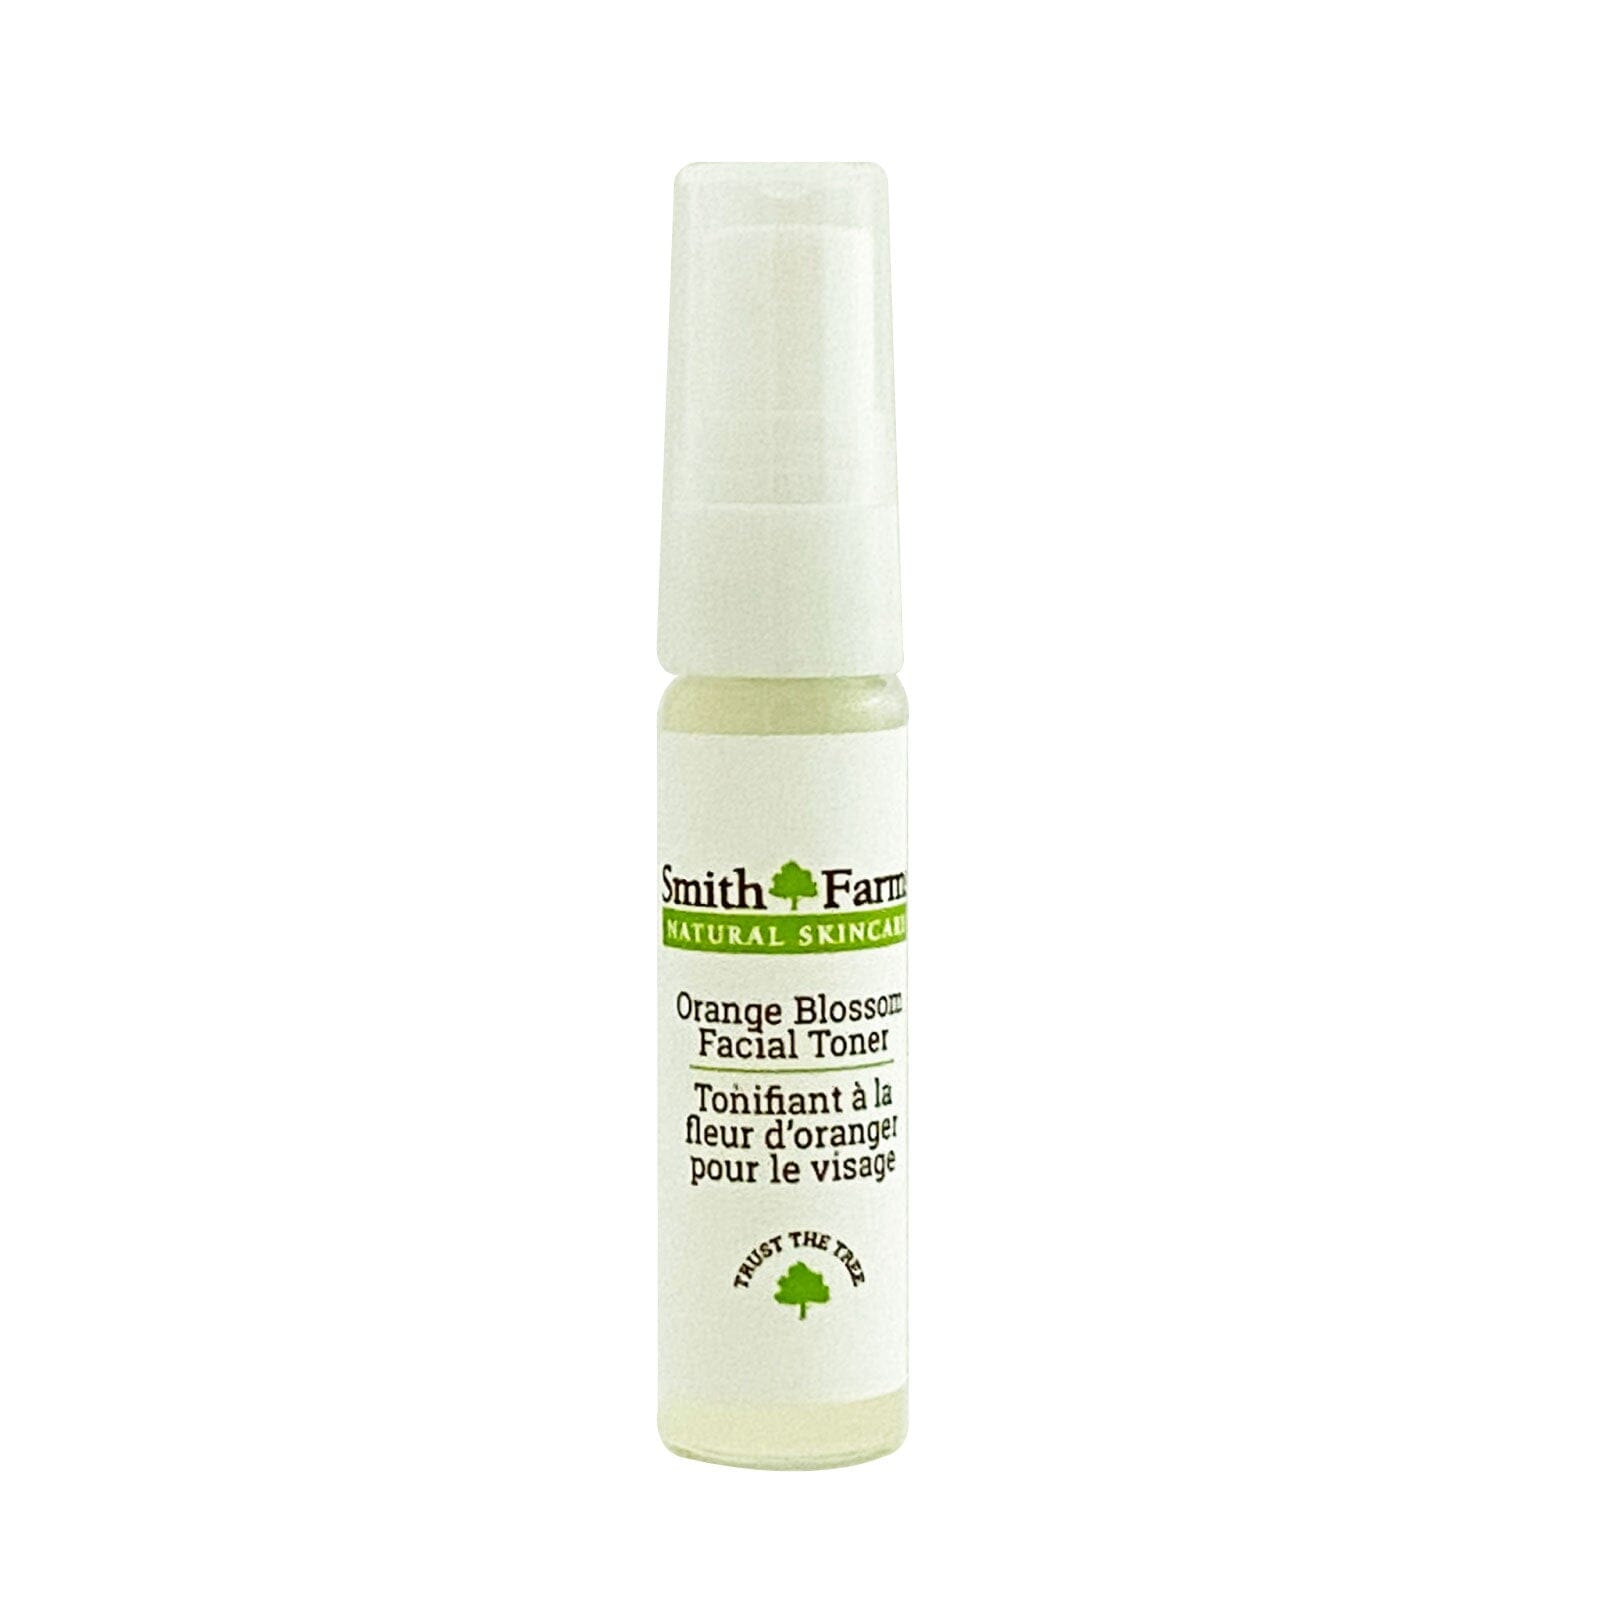 Orange Blossom Facial Toner Face Care, Our Products Smith Farms 5 ml (sample) 